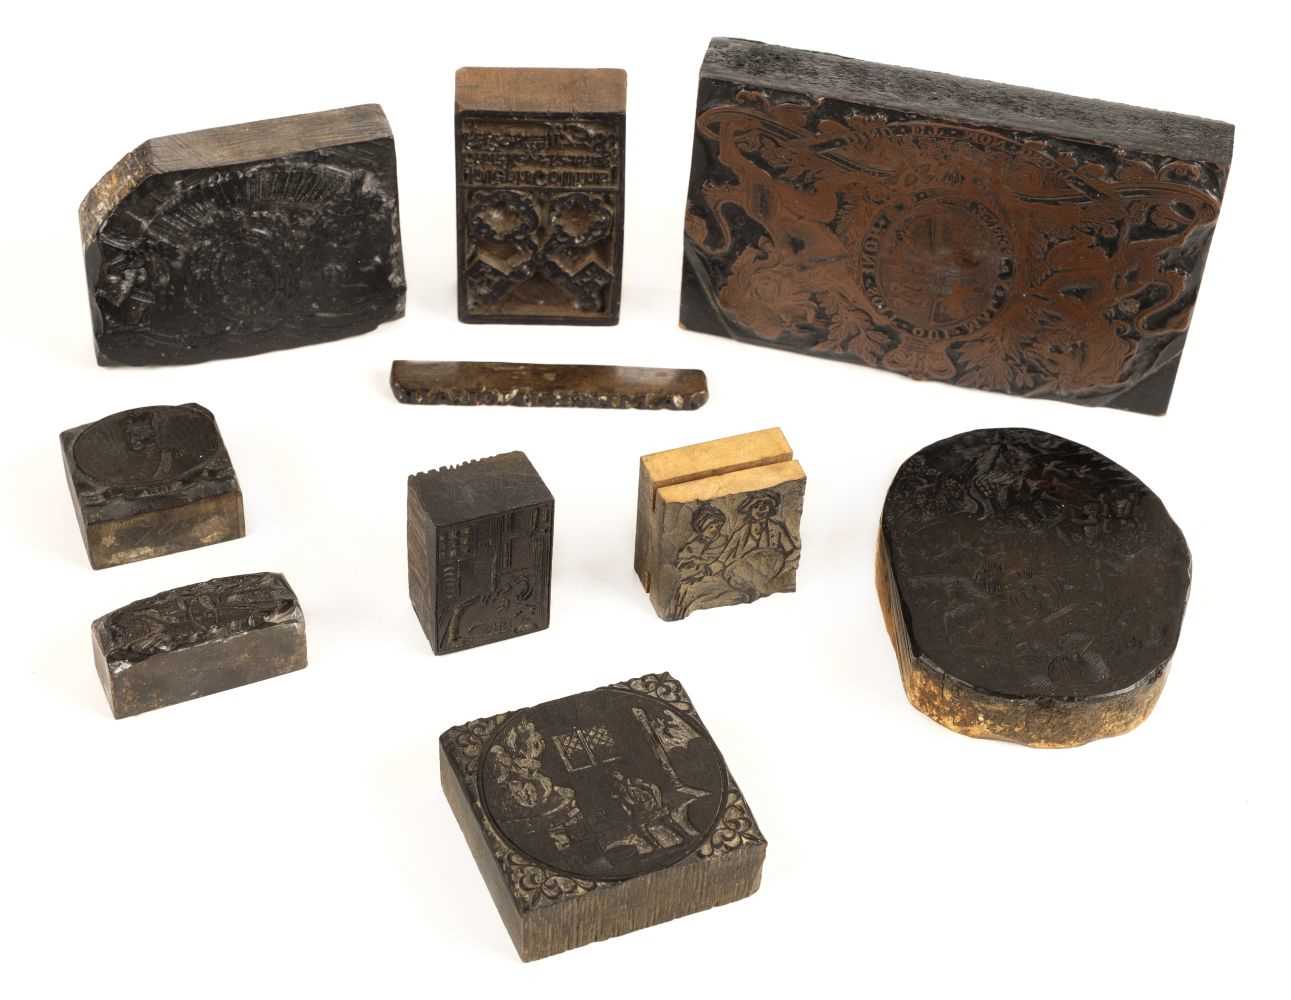 Lot 146 - Printers block. A collection of 18th century printers blocks